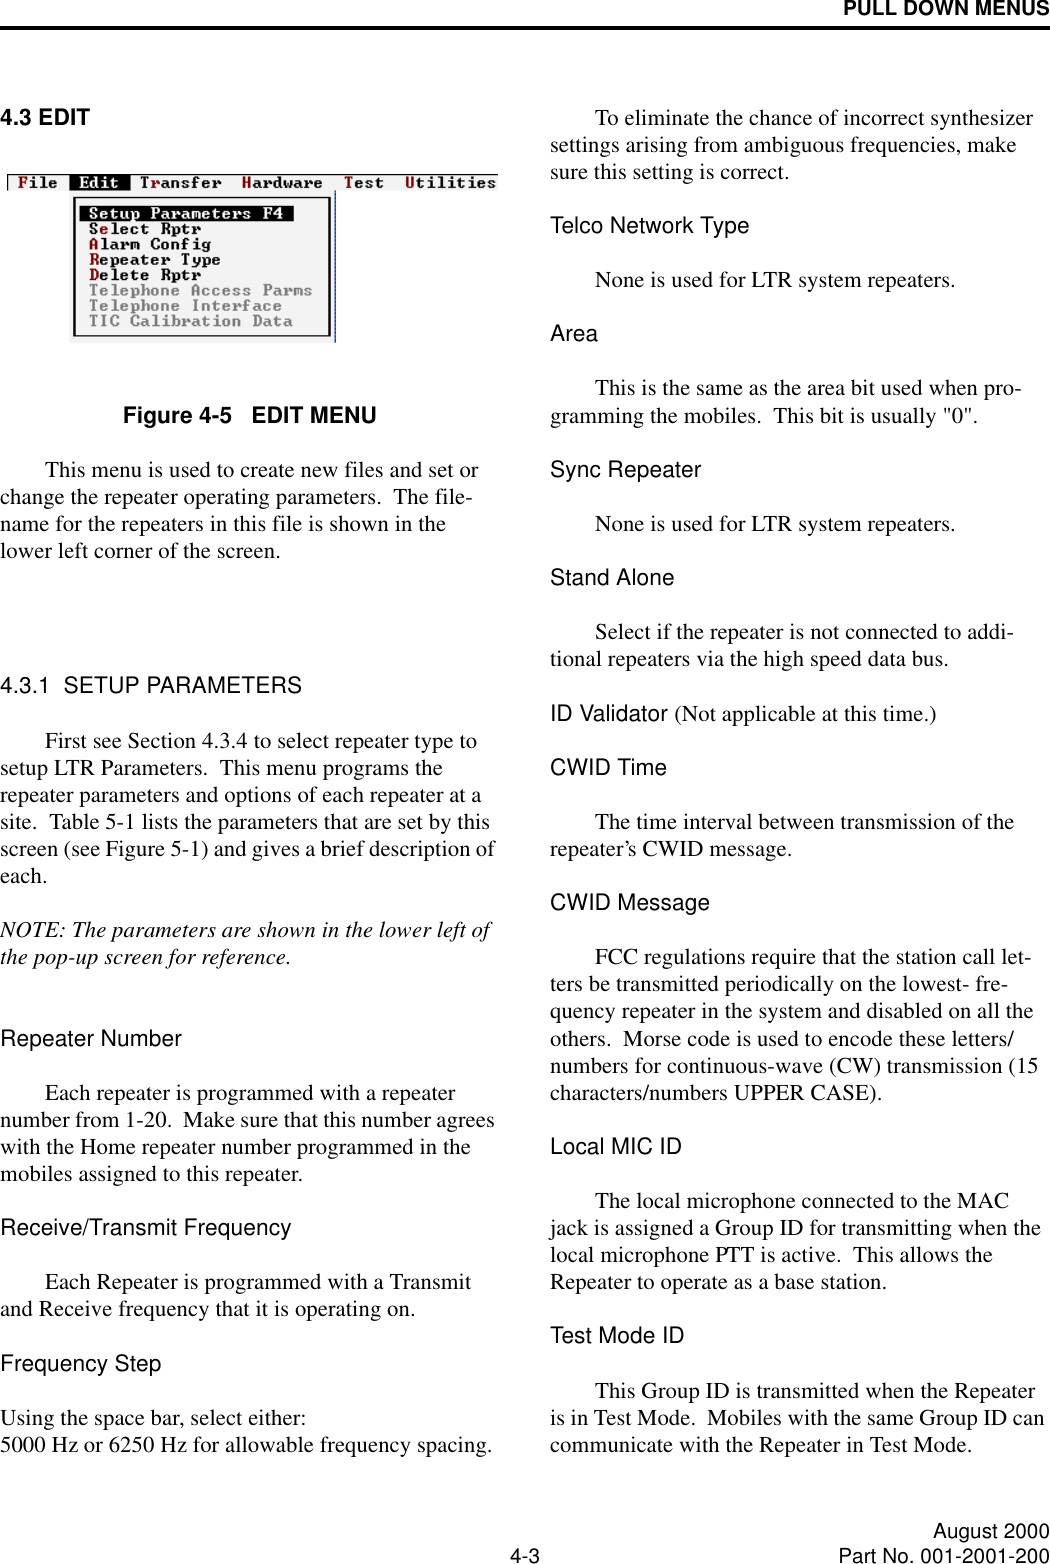 PULL DOWN MENUS4-3 August 2000Part No. 001-2001-2004.3 EDITFigure 4-5   EDIT MENUThis menu is used to create new files and set or change the repeater operating parameters.  The file-name for the repeaters in this file is shown in the lower left corner of the screen.4.3.1  SETUP PARAMETERSFirst see Section 4.3.4 to select repeater type to setup LTR Parameters.  This menu programs the repeater parameters and options of each repeater at a site.  Table 5-1 lists the parameters that are set by this screen (see Figure 5-1) and gives a brief description of each.   NOTE: The parameters are shown in the lower left of the pop-up screen for reference.Repeater NumberEach repeater is programmed with a repeater number from 1-20.  Make sure that this number agrees with the Home repeater number programmed in the mobiles assigned to this repeater.Receive/Transmit FrequencyEach Repeater is programmed with a Transmit and Receive frequency that it is operating on.Frequency StepUsing the space bar, select either: 5000 Hz or 6250 Hz for allowable frequency spacing.To eliminate the chance of incorrect synthesizer settings arising from ambiguous frequencies, make sure this setting is correct.Telco Network TypeNone is used for LTR system repeaters.AreaThis is the same as the area bit used when pro-gramming the mobiles.  This bit is usually &quot;0&quot;.Sync RepeaterNone is used for LTR system repeaters.Stand AloneSelect if the repeater is not connected to addi-tional repeaters via the high speed data bus.ID Validator (Not applicable at this time.)CWID TimeThe time interval between transmission of the repeater’s CWID message.CWID MessageFCC regulations require that the station call let-ters be transmitted periodically on the lowest- fre-quency repeater in the system and disabled on all the others.  Morse code is used to encode these letters/numbers for continuous-wave (CW) transmission (15 characters/numbers UPPER CASE).Local MIC IDThe local microphone connected to the MAC jack is assigned a Group ID for transmitting when the local microphone PTT is active.  This allows the Repeater to operate as a base station.Test Mode IDThis Group ID is transmitted when the Repeater is in Test Mode.  Mobiles with the same Group ID can communicate with the Repeater in Test Mode.